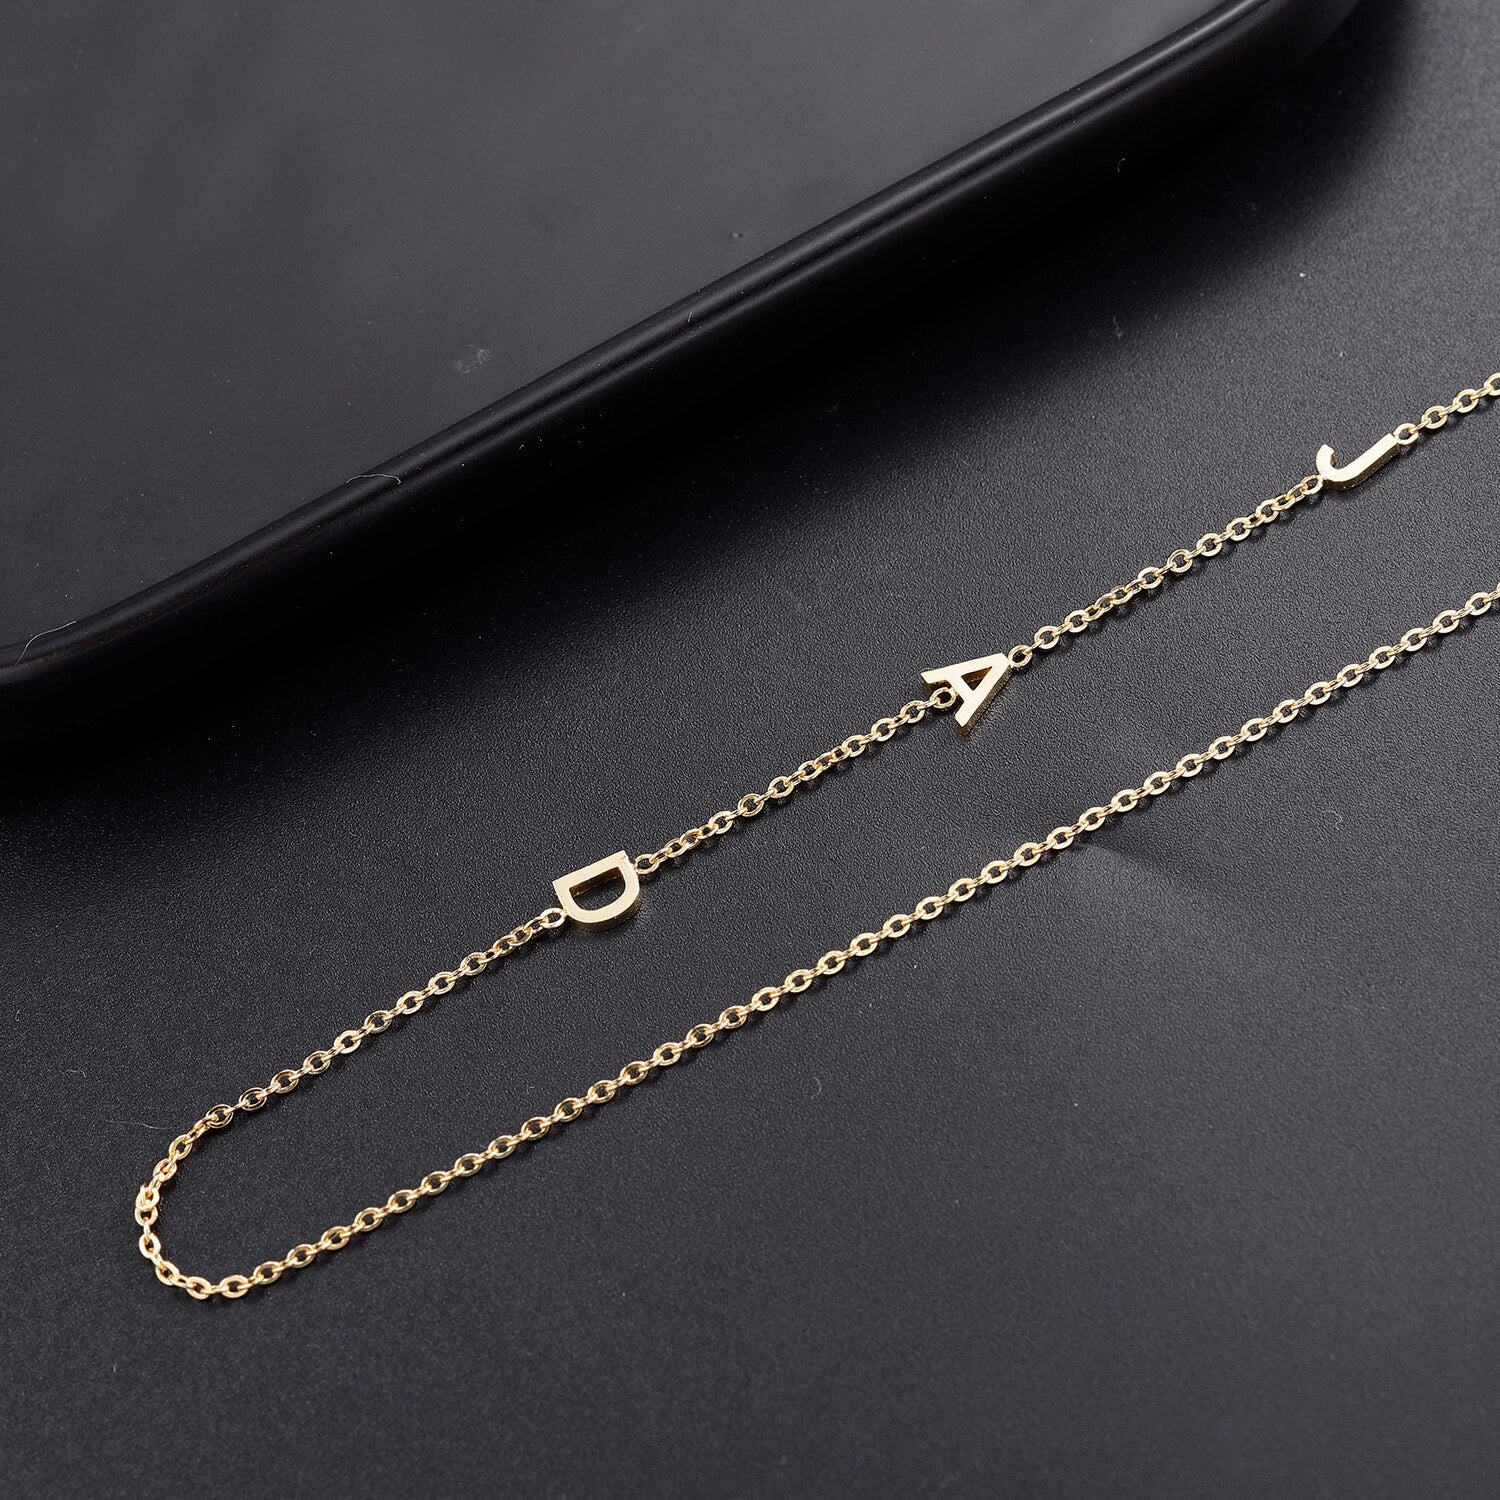 Personalised Sideways Initials Necklace Inspired by Meghan Markle